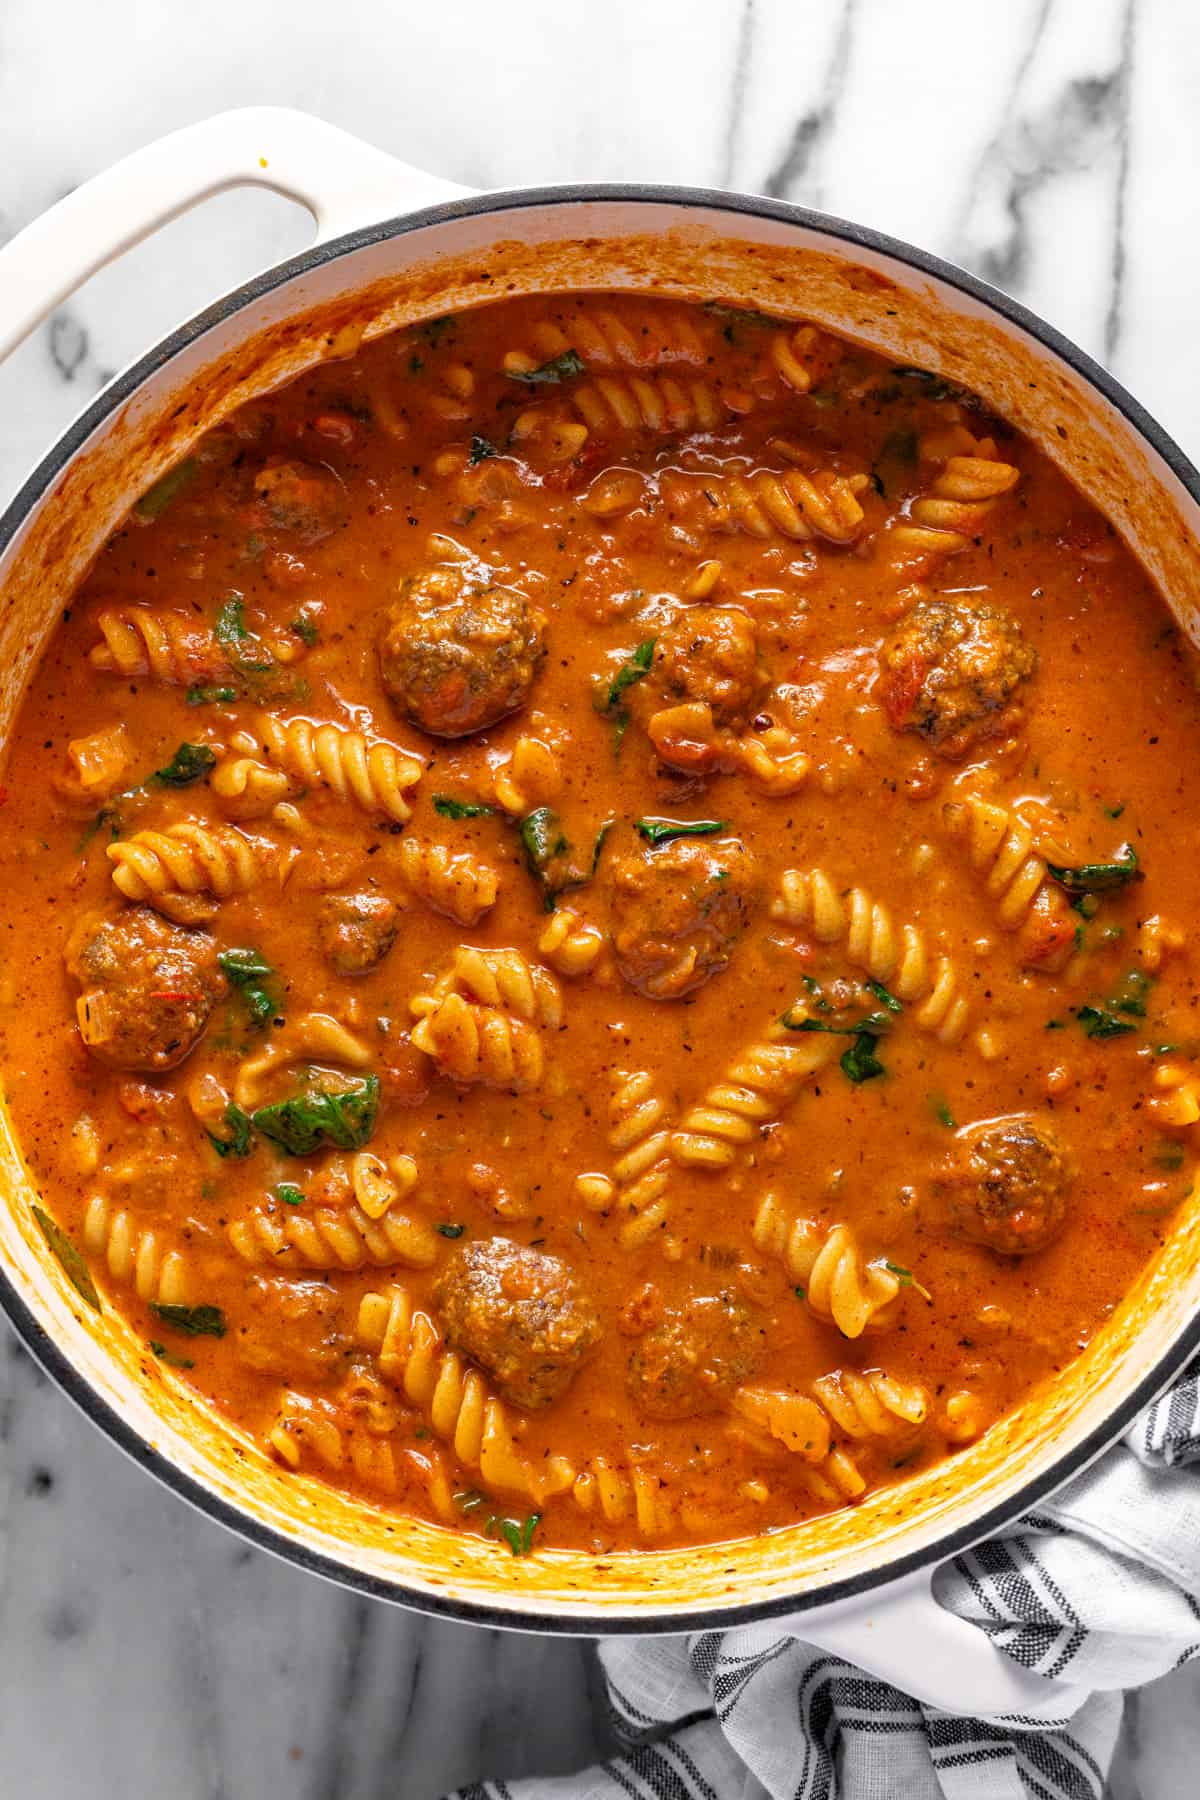 Large white pot filled with creamy homemade meatball pasta soup.